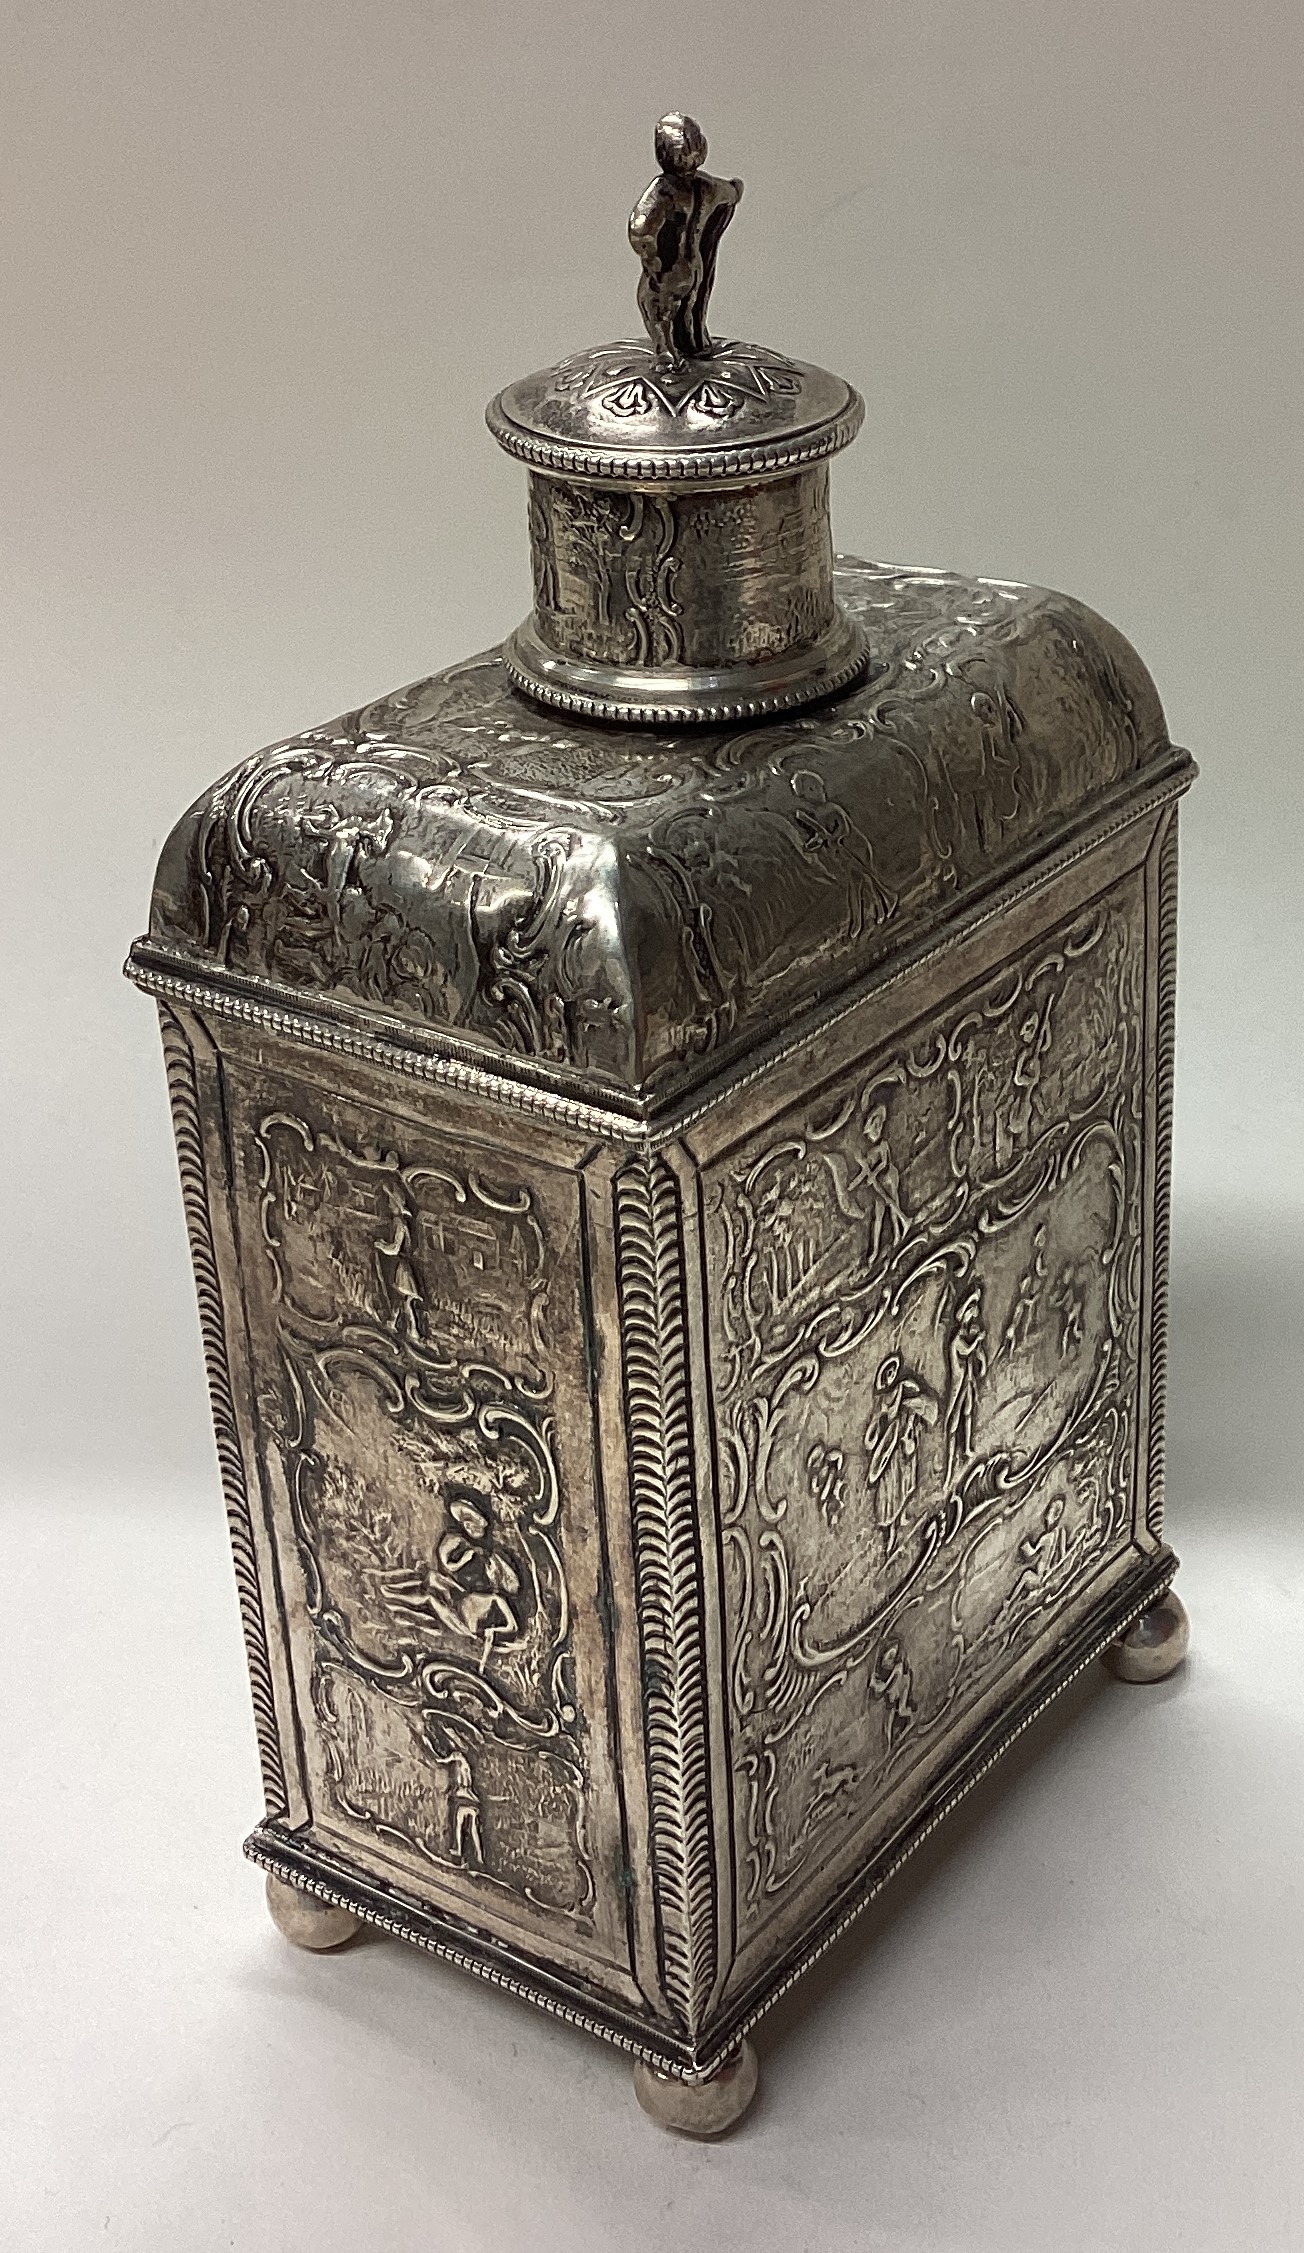 A 19th Century Dutch silver tea caddy with embossed decoration. - Image 3 of 4